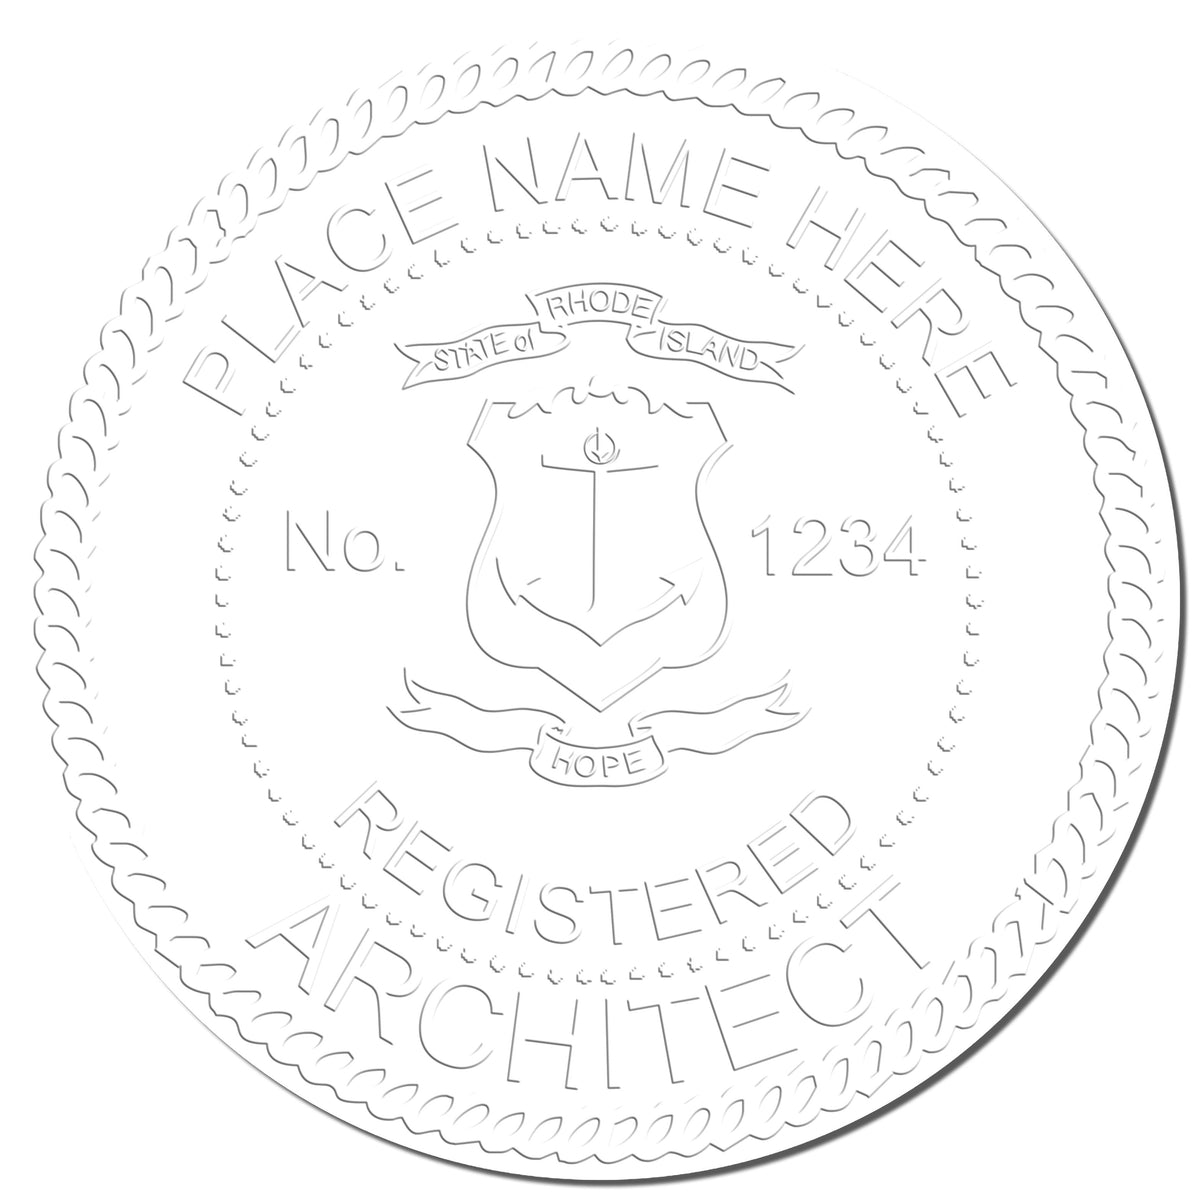 A photograph of the Extended Long Reach Rhode Island Architect Seal Embosser stamp impression reveals a vivid, professional image of the on paper.